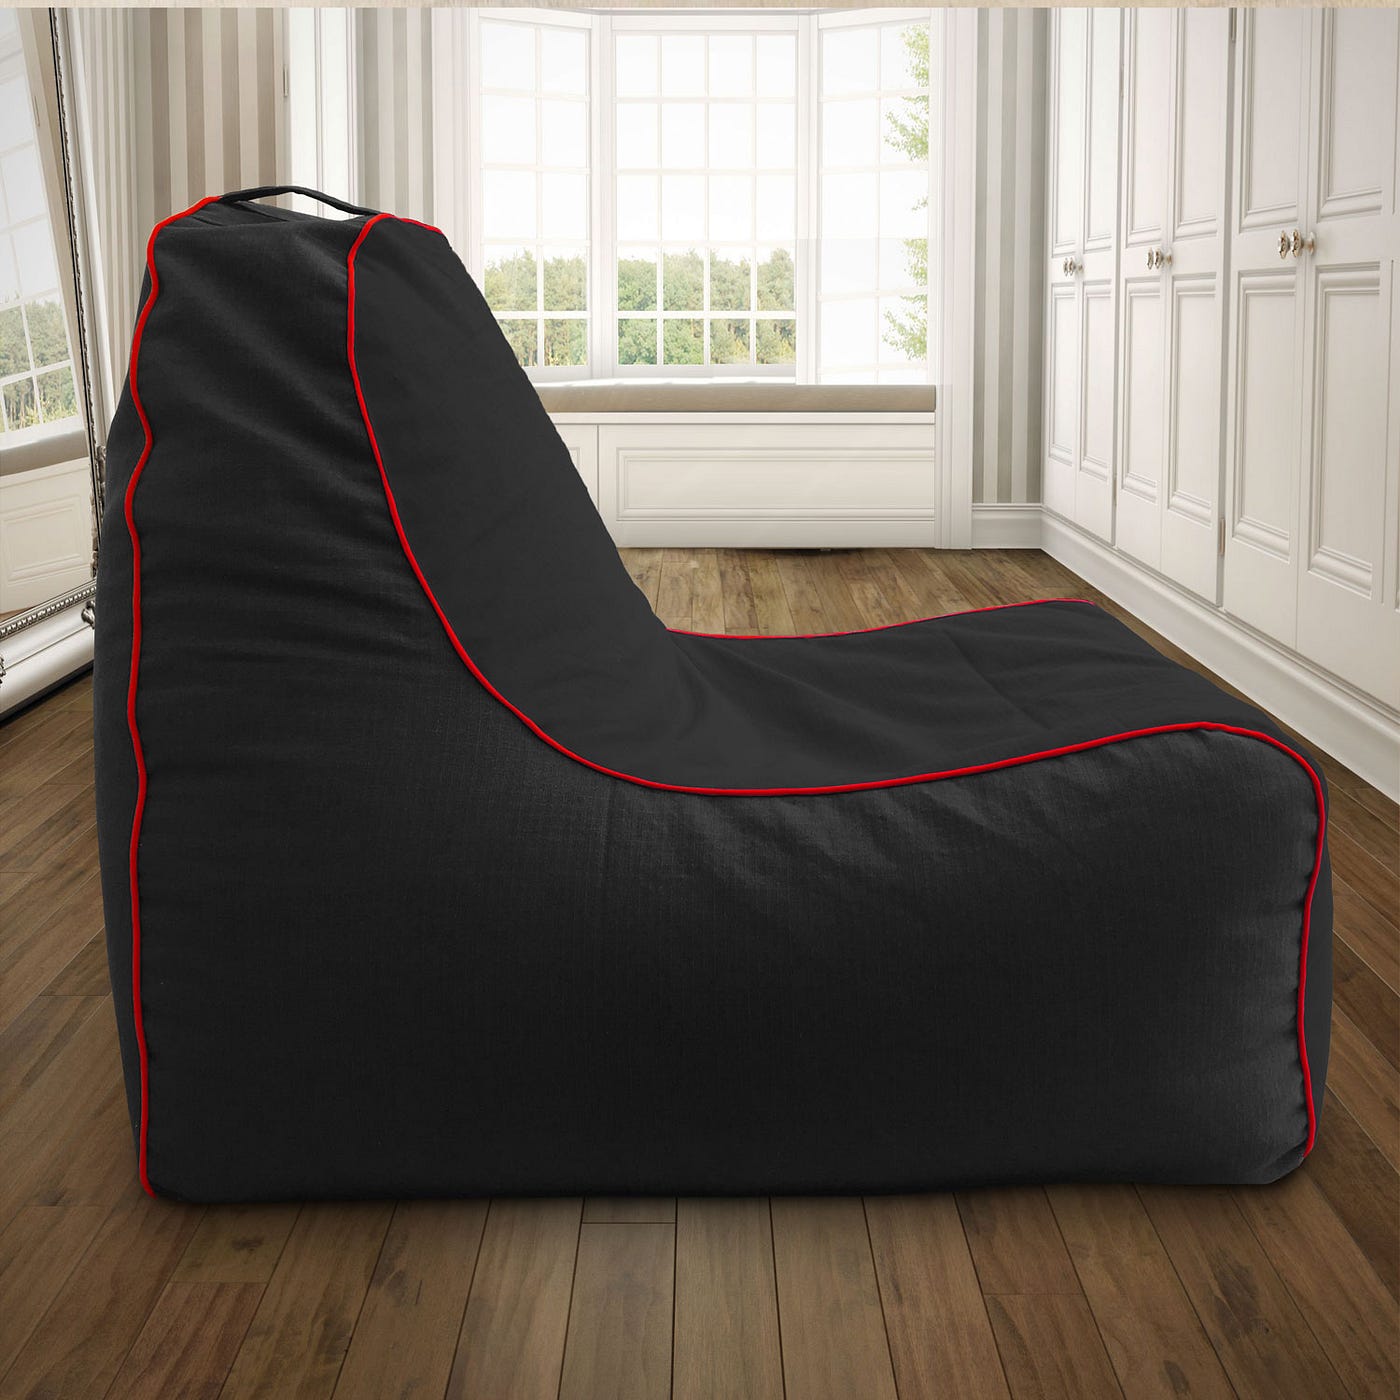 Are Bean Bags Good for Your Back?